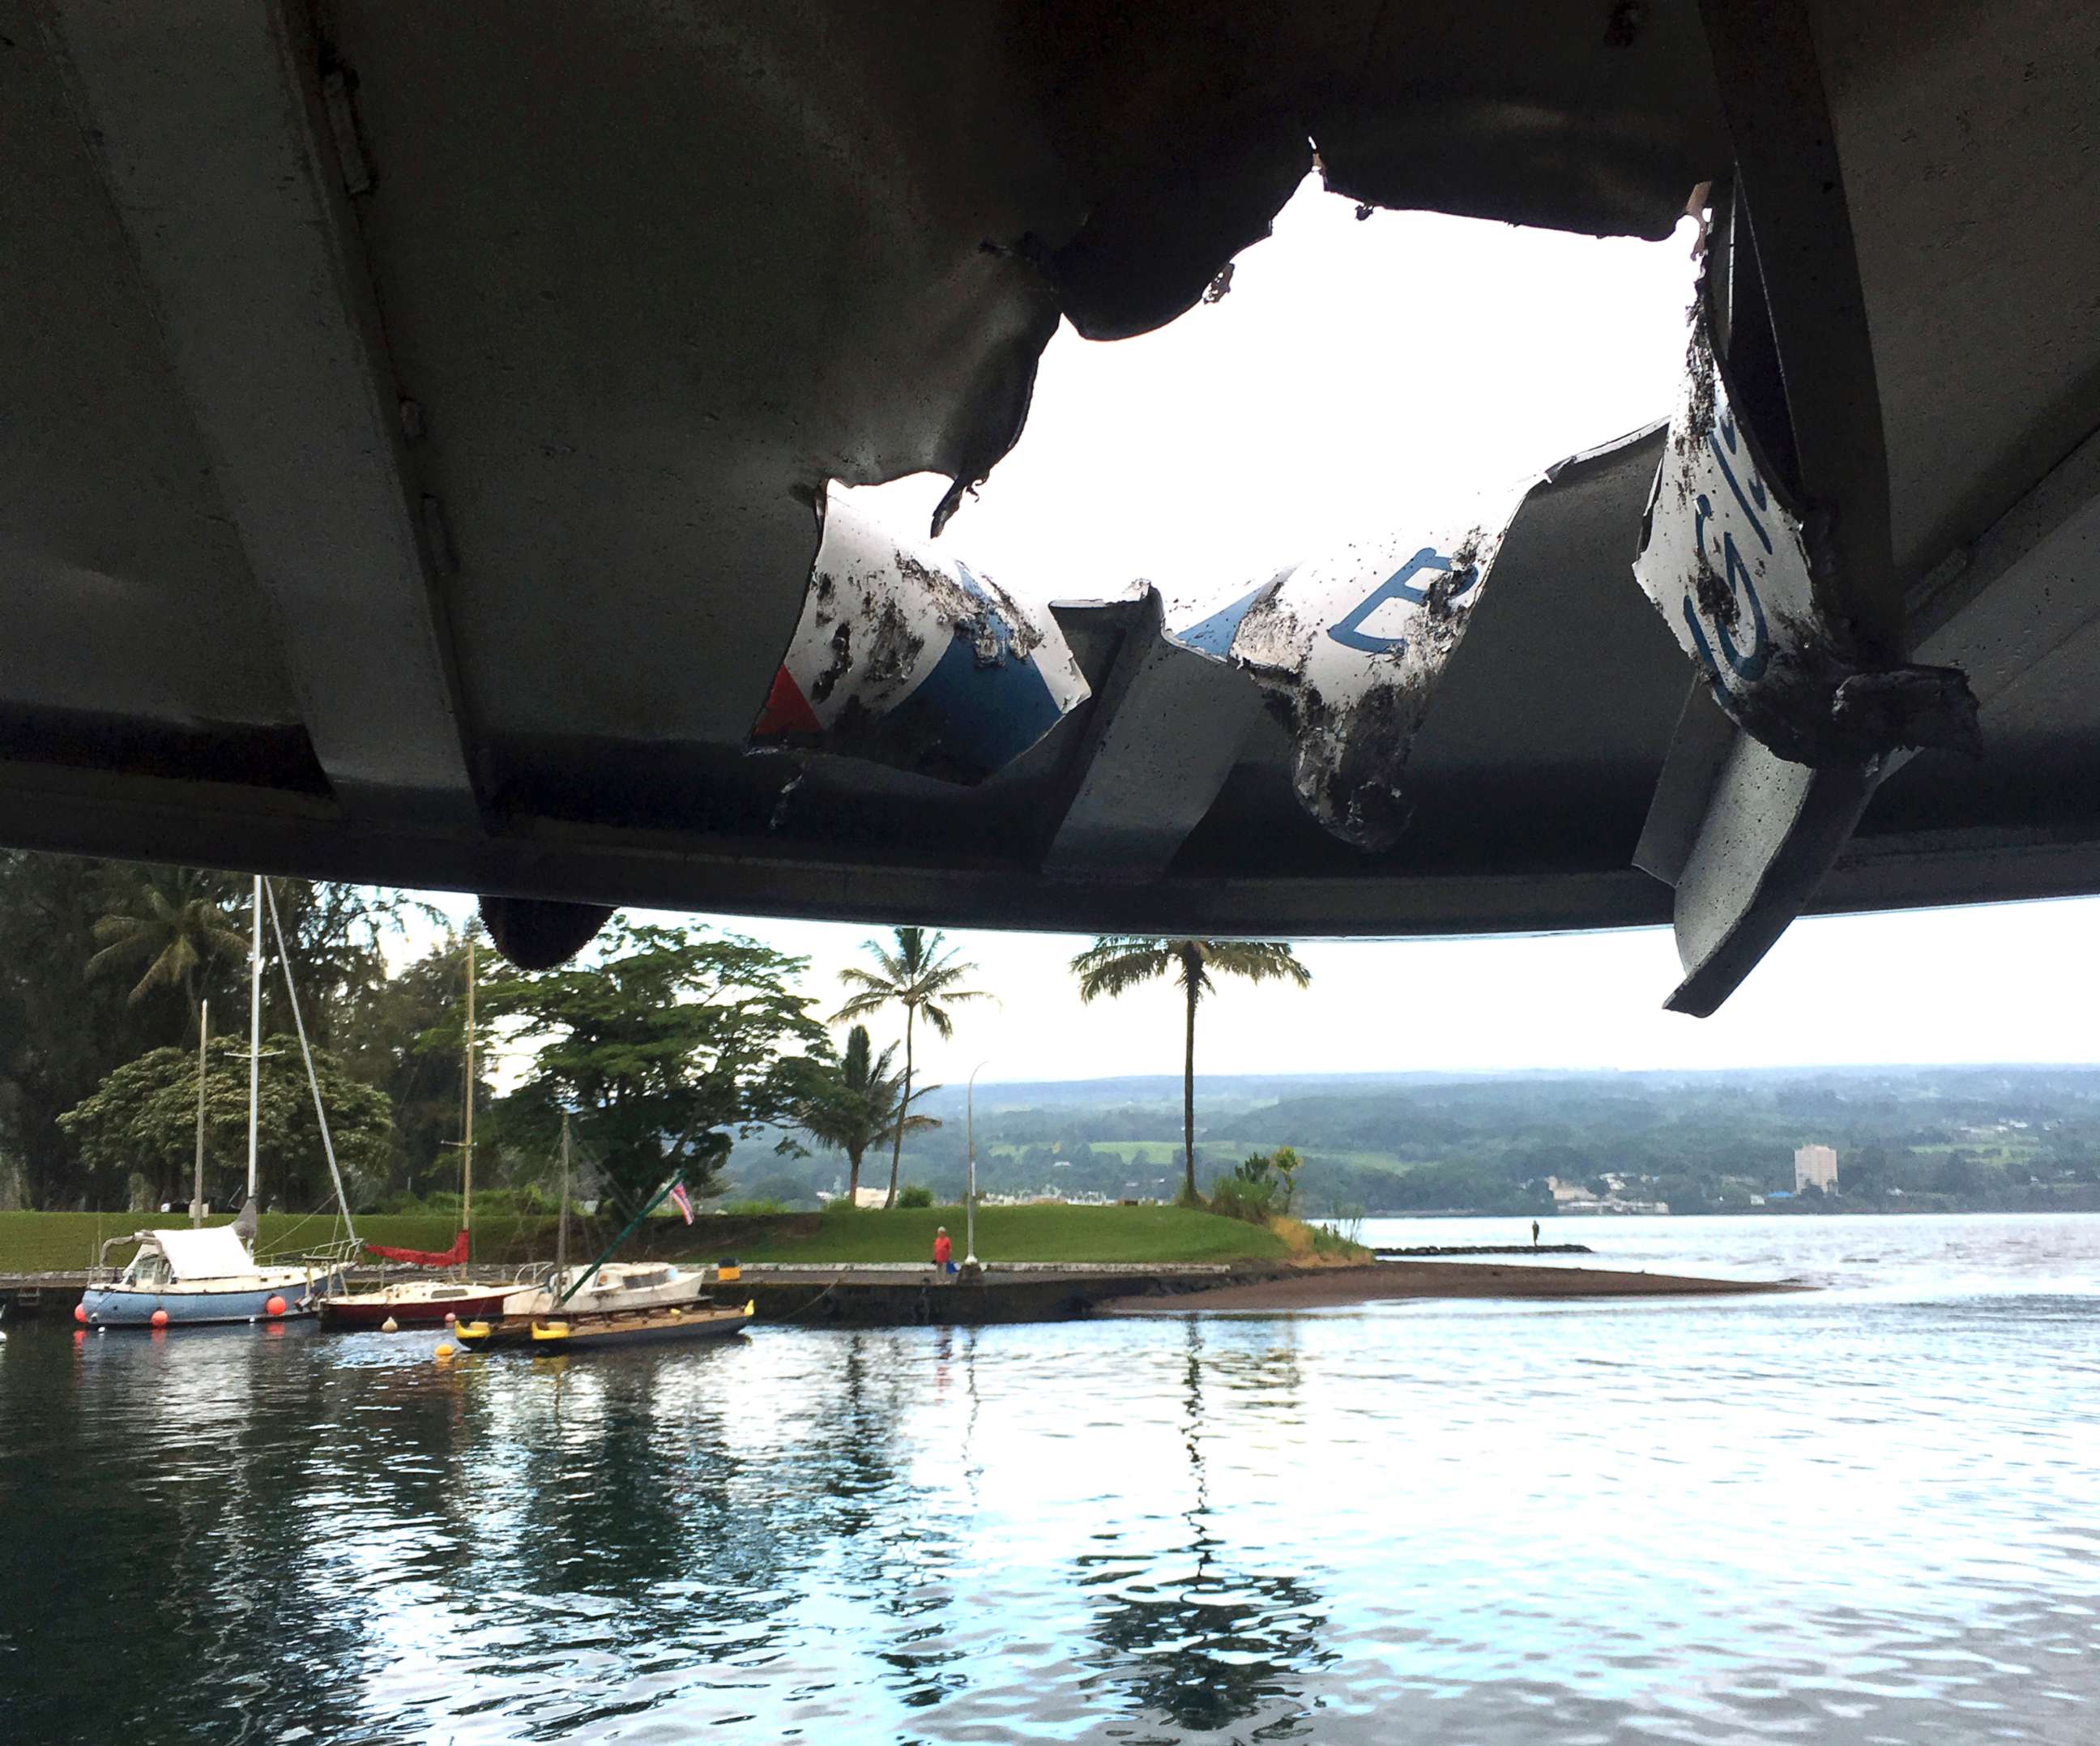 PHOTO: This photo provided by the Hawaii Department of Land and Natural Resources shows damage to the roof of a tour boat after an explosion sent lava flying through the roof off the Big Island of Hawaii on July 16, 2018, injuring at least 23 people.